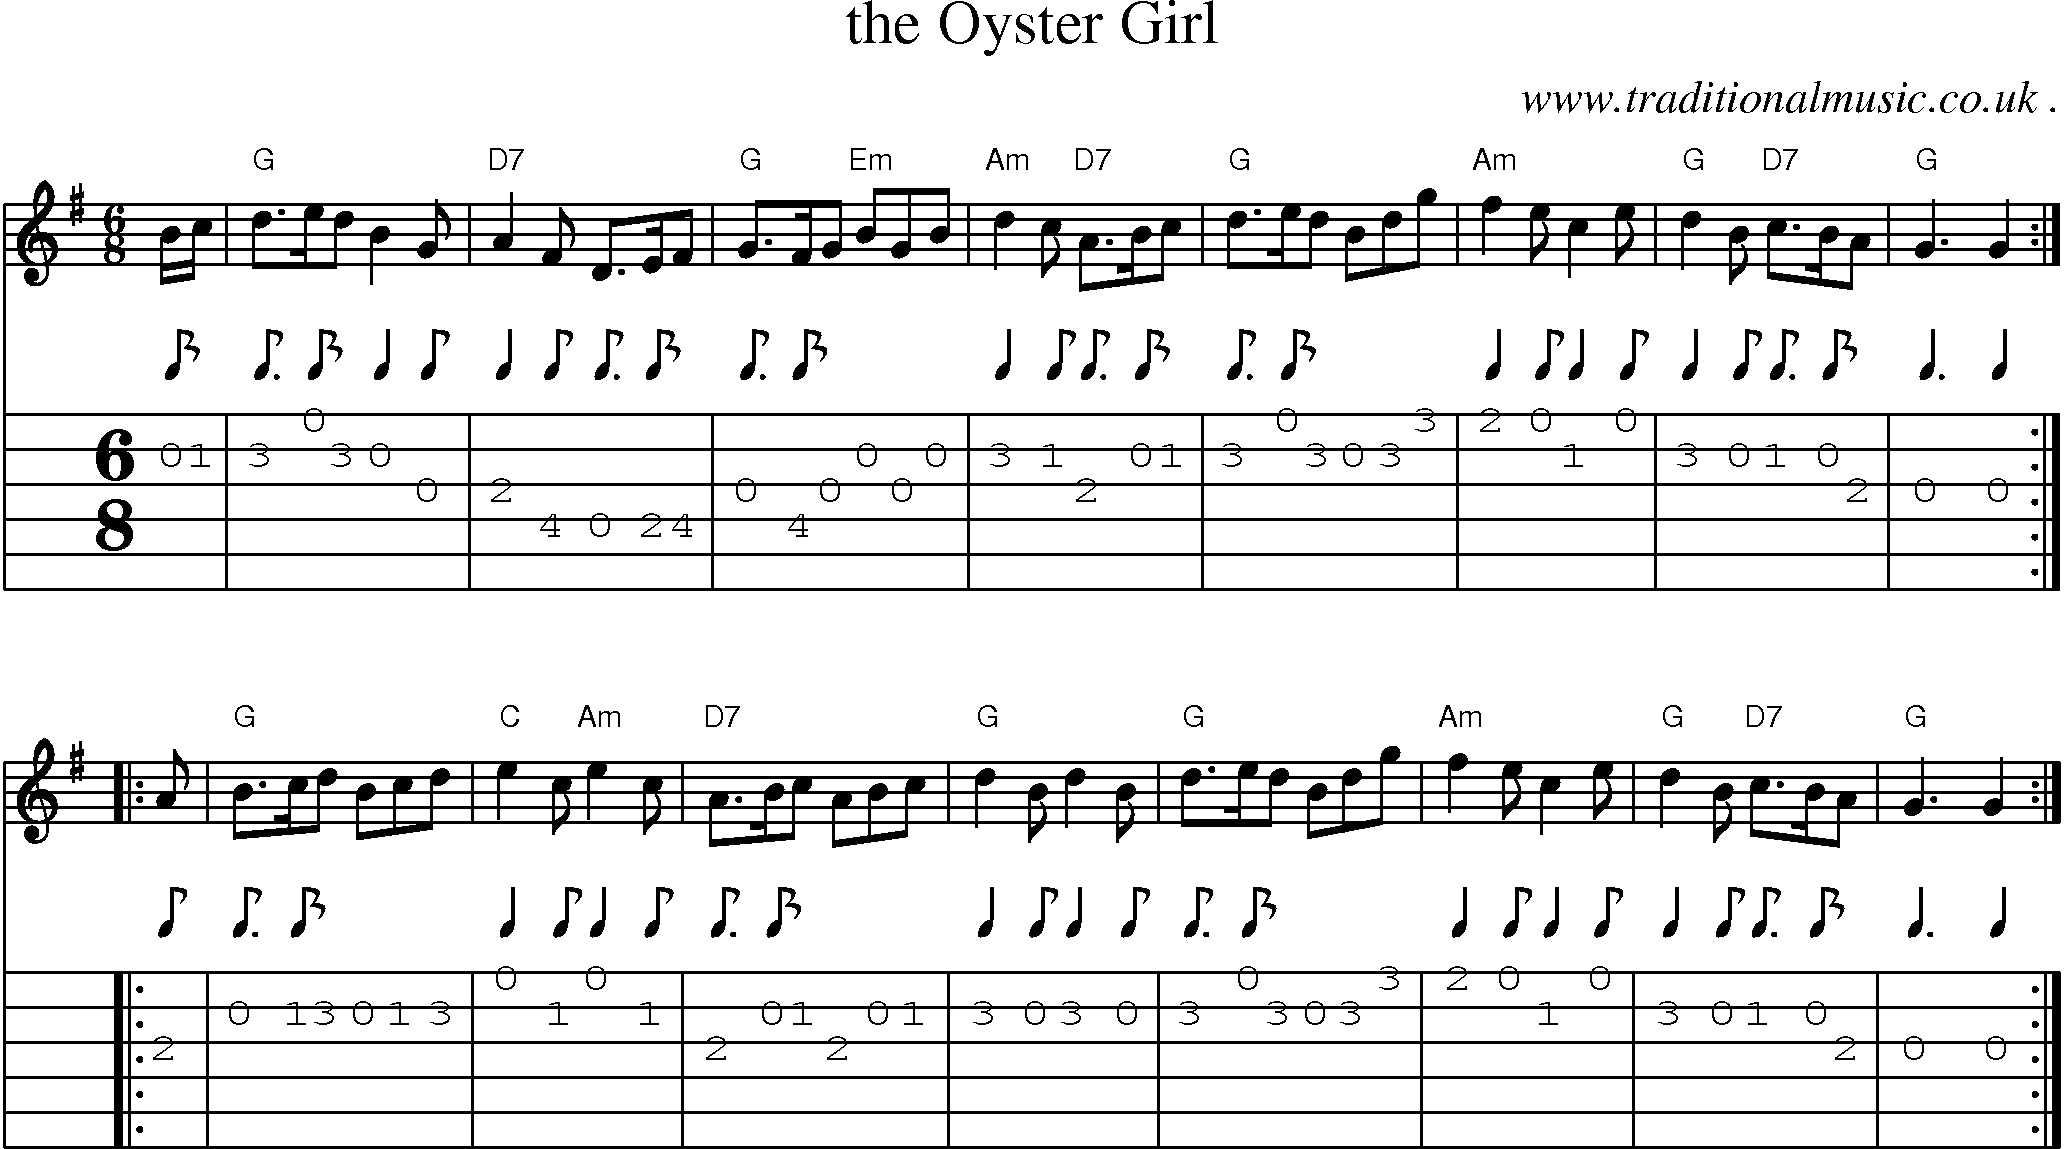 Sheet-music  score, Chords and Guitar Tabs for The Oyster Girl